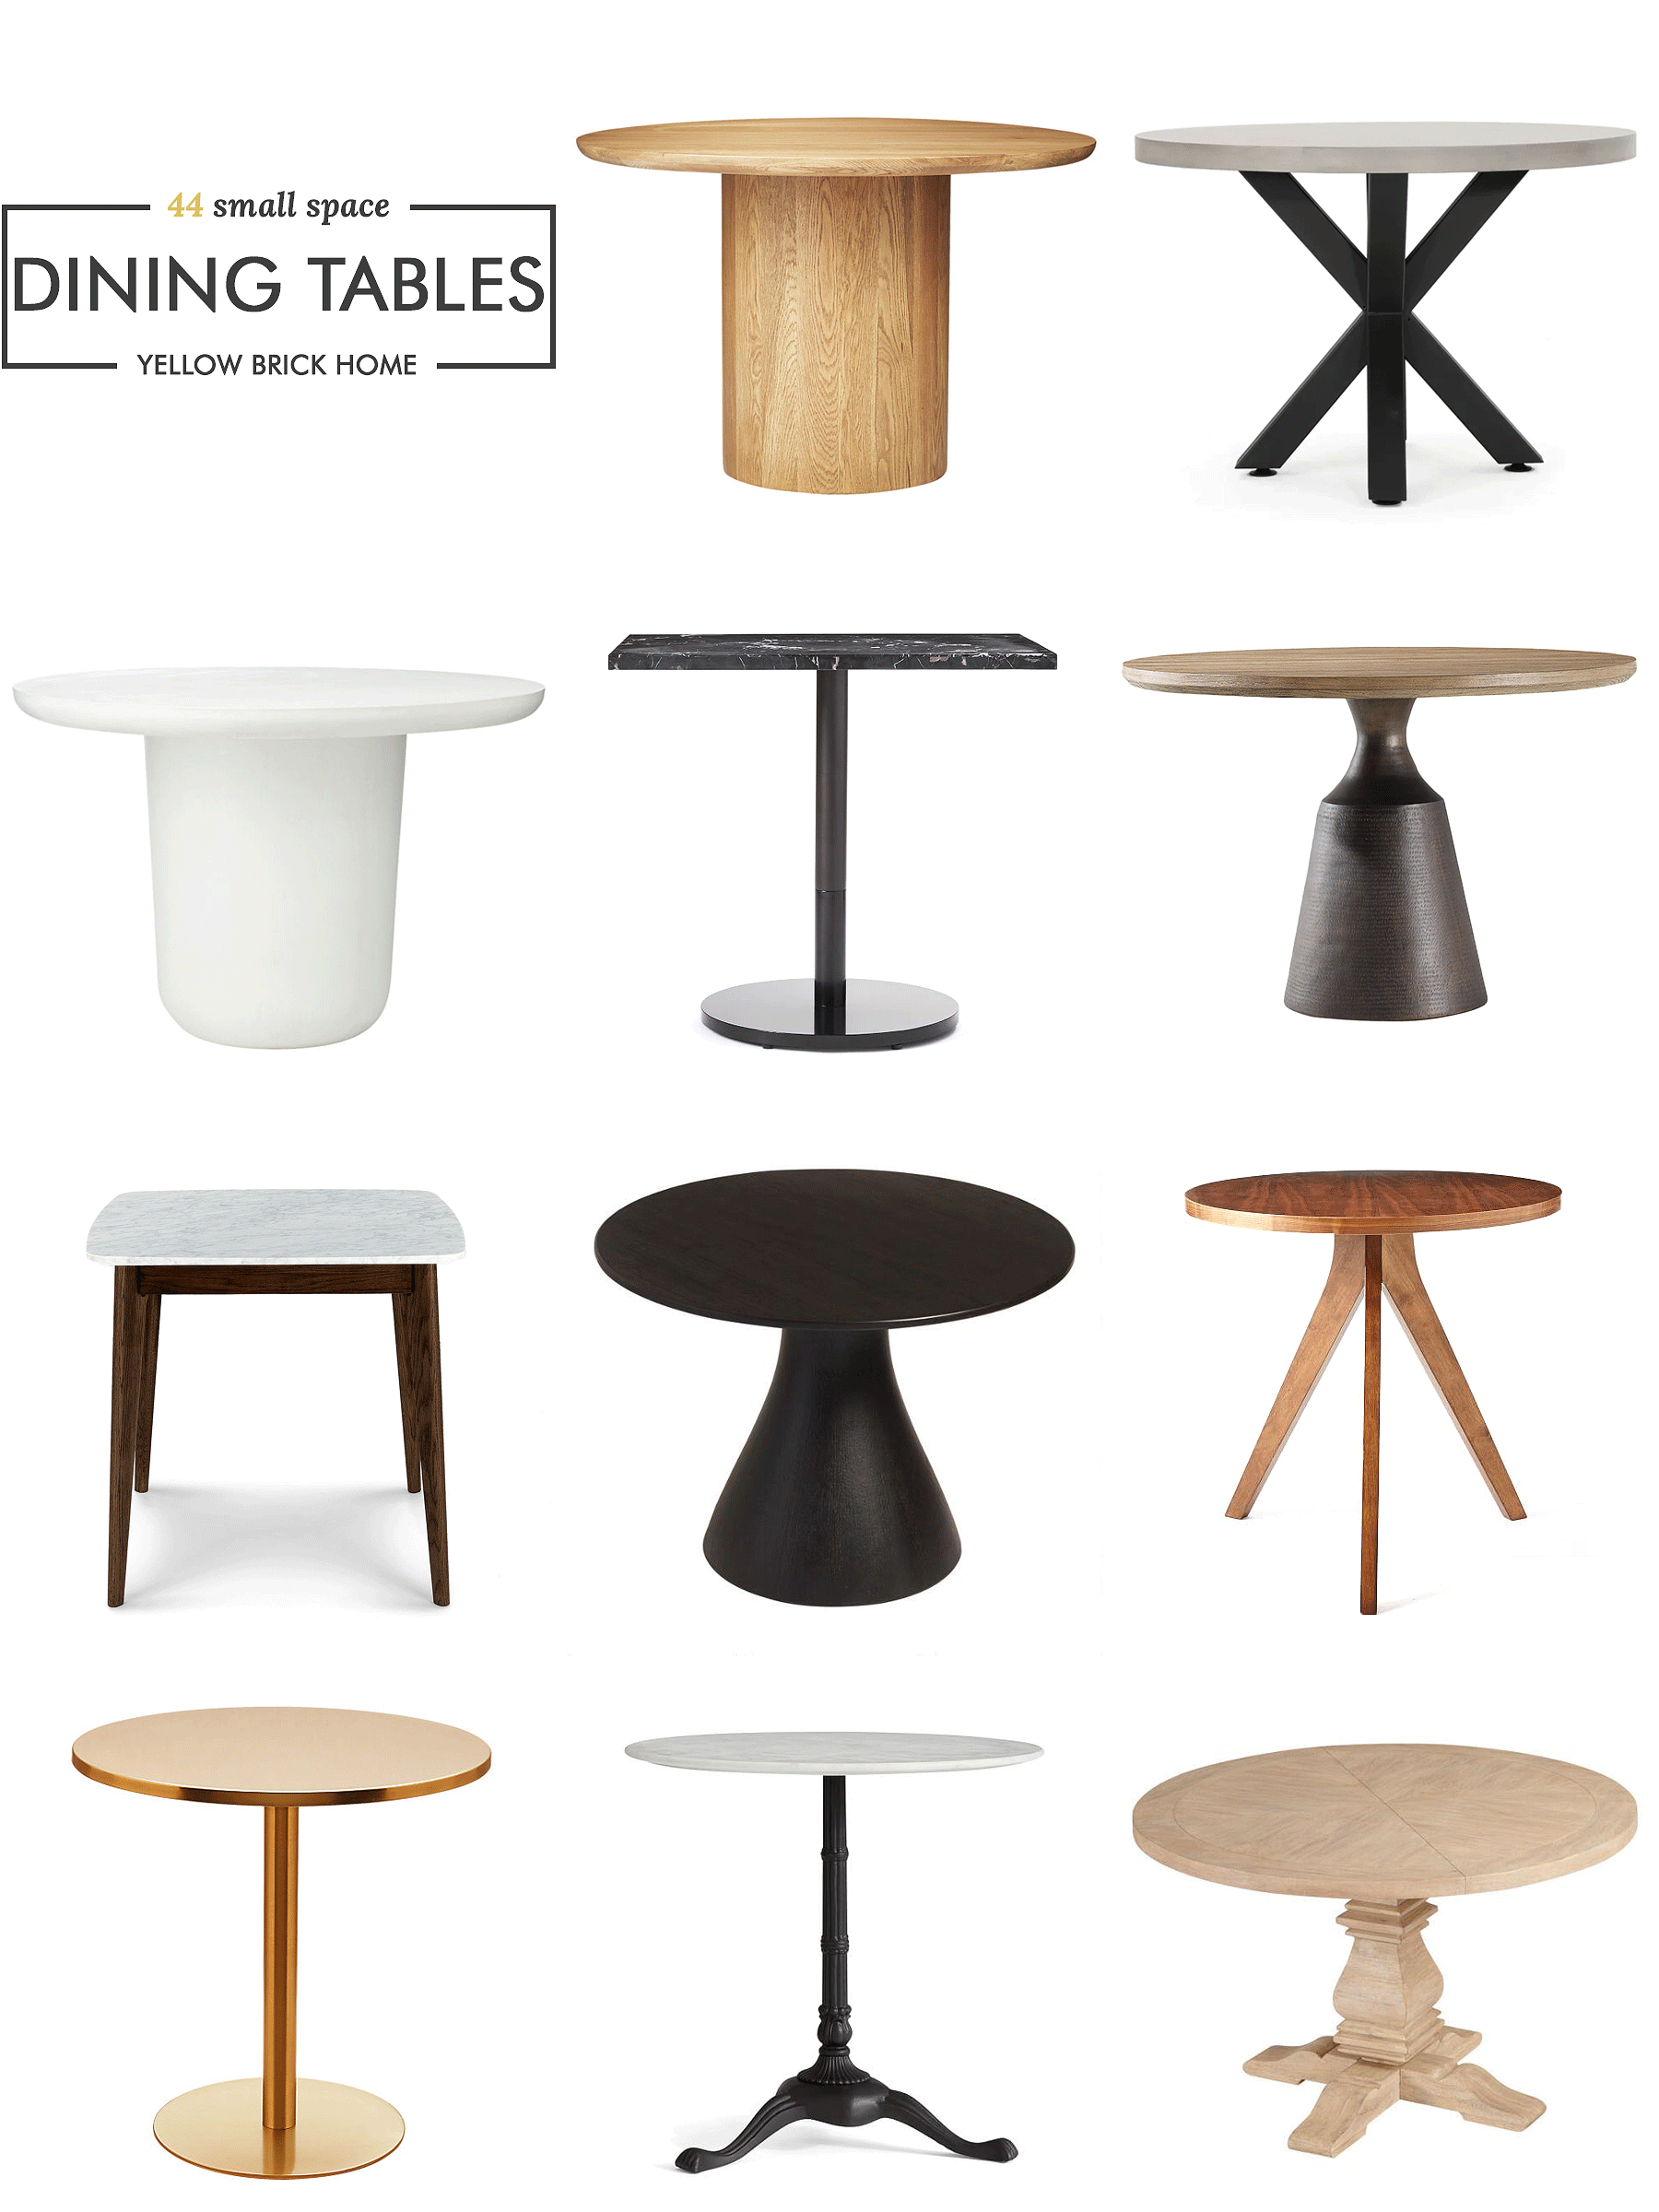 44 Dining Tables For When You Re Short On Space Yellow Brick Home